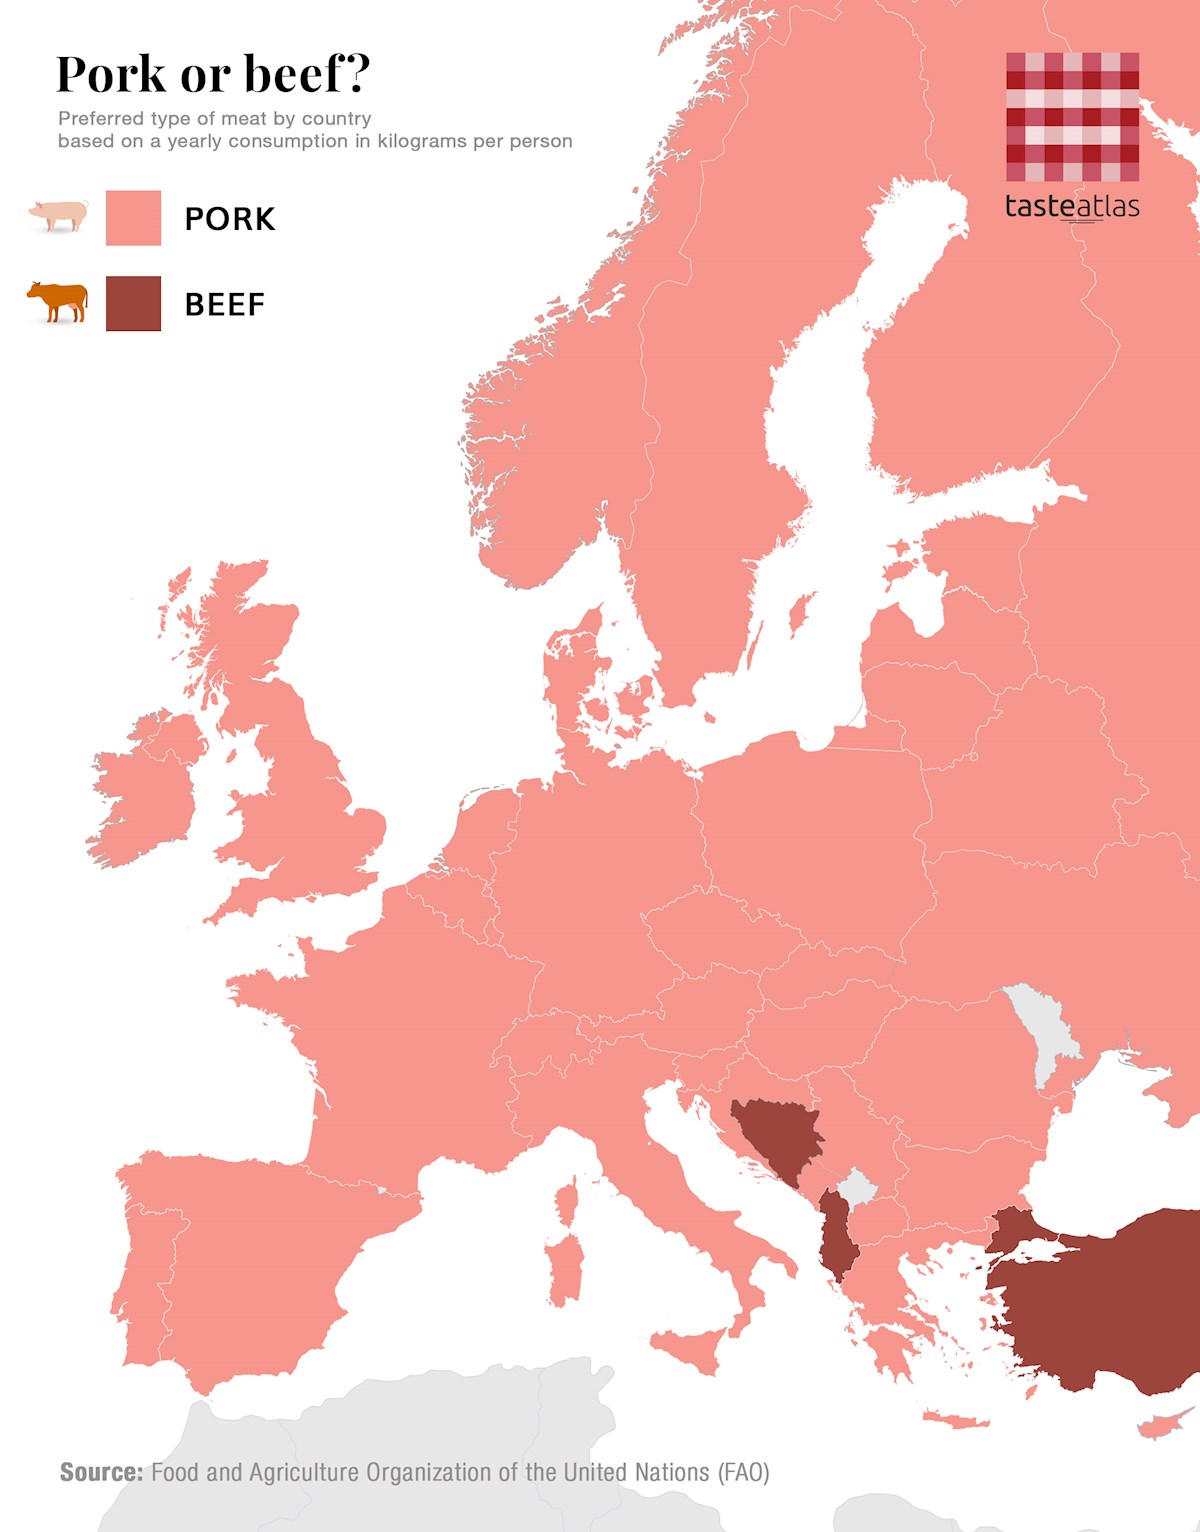 Preferred type of meat in each European country, when considering only pork and beef